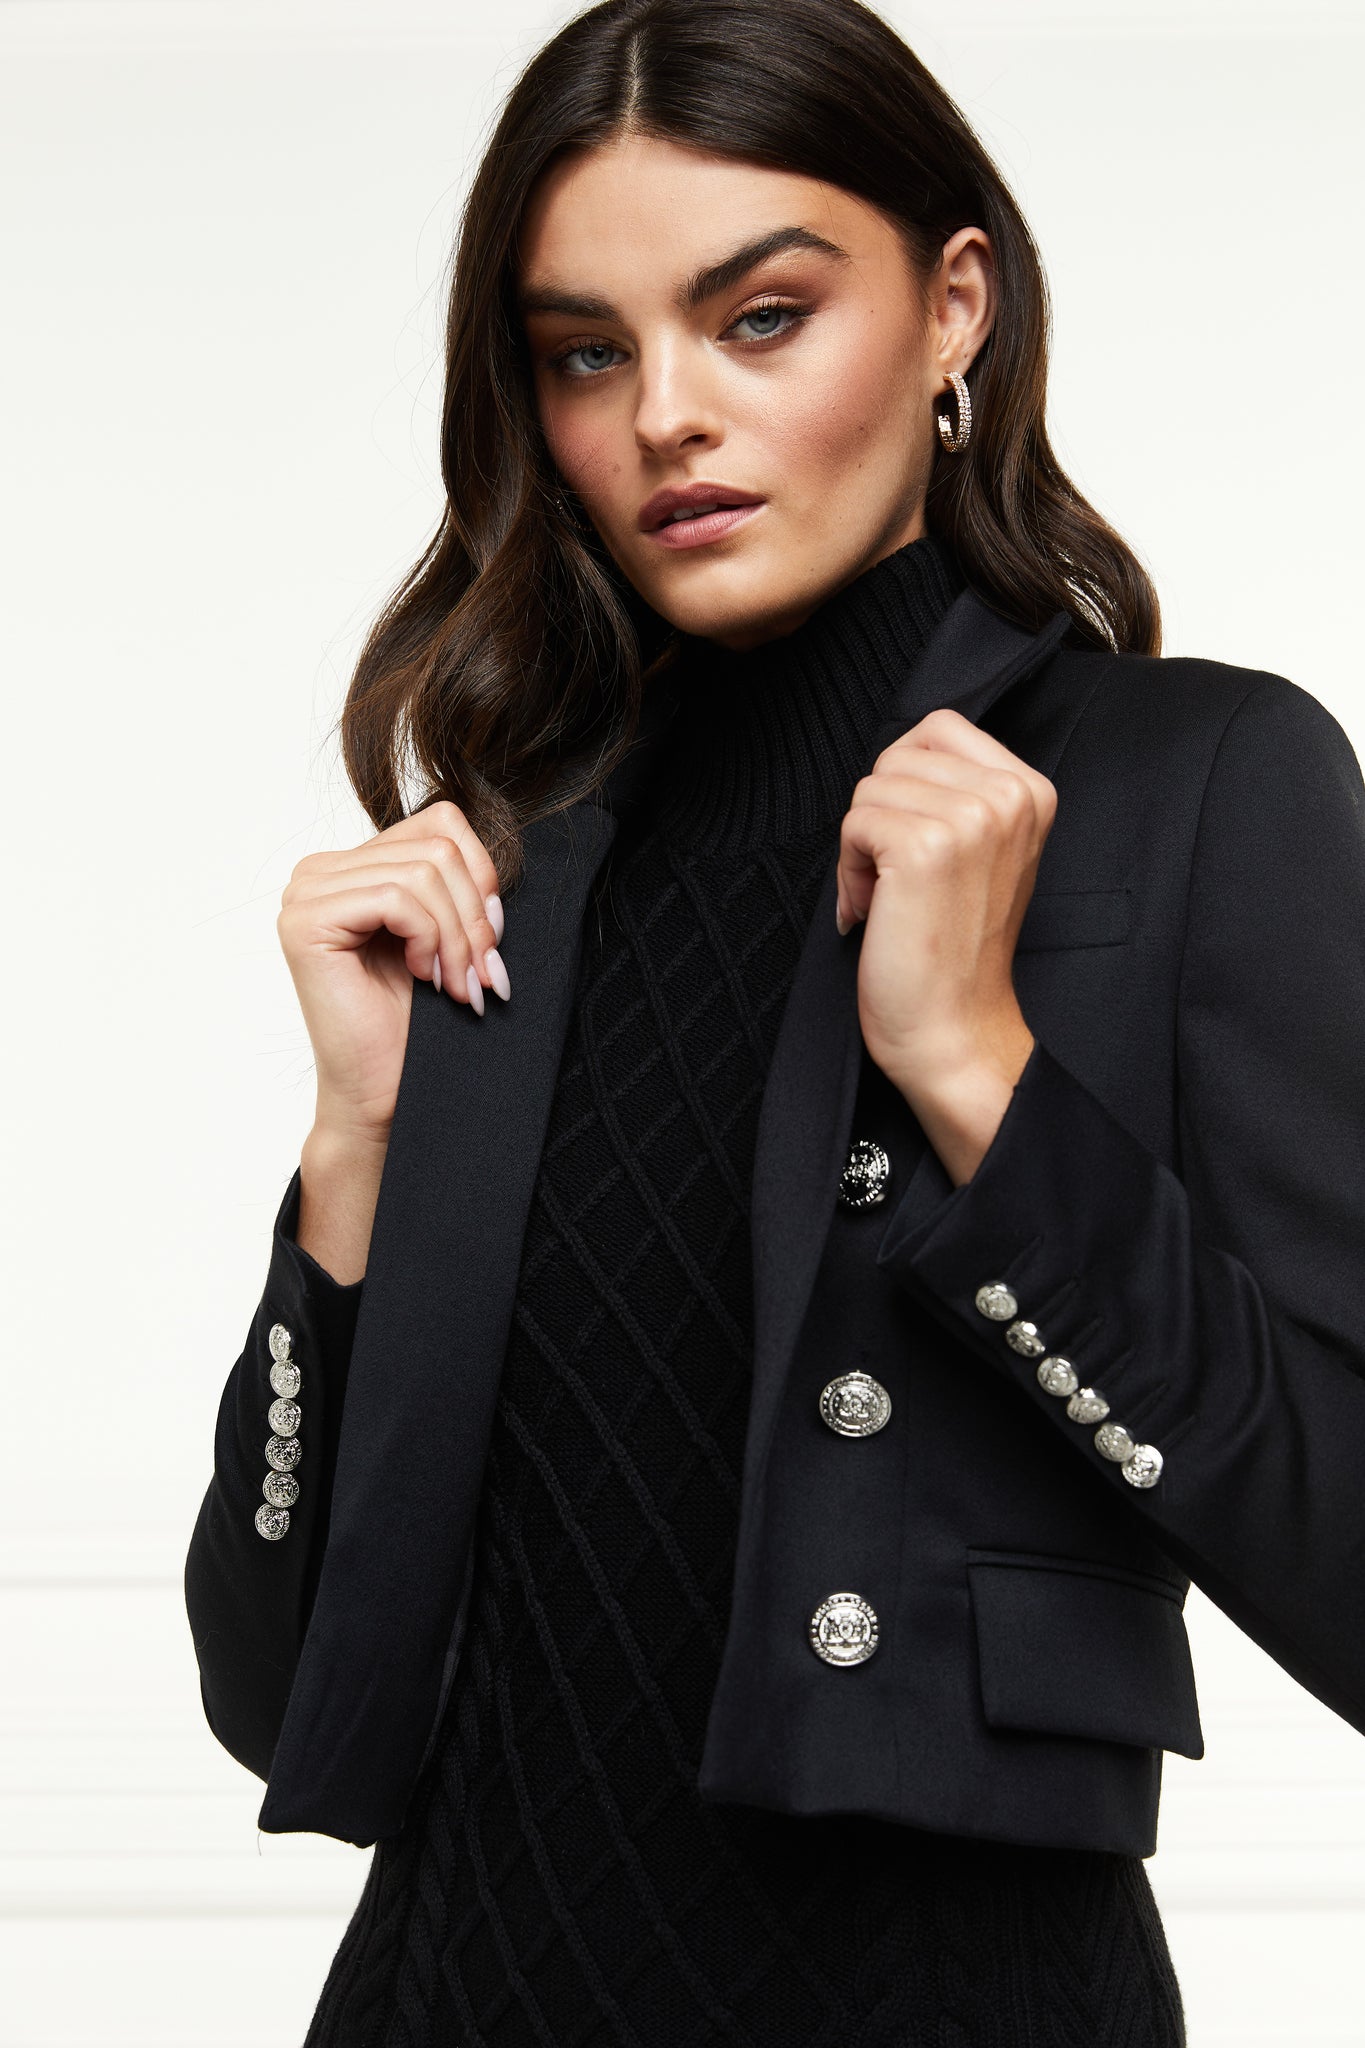 British made tailored cropped jacket in black with welt pockets and gold button detail down the front and on sleeves